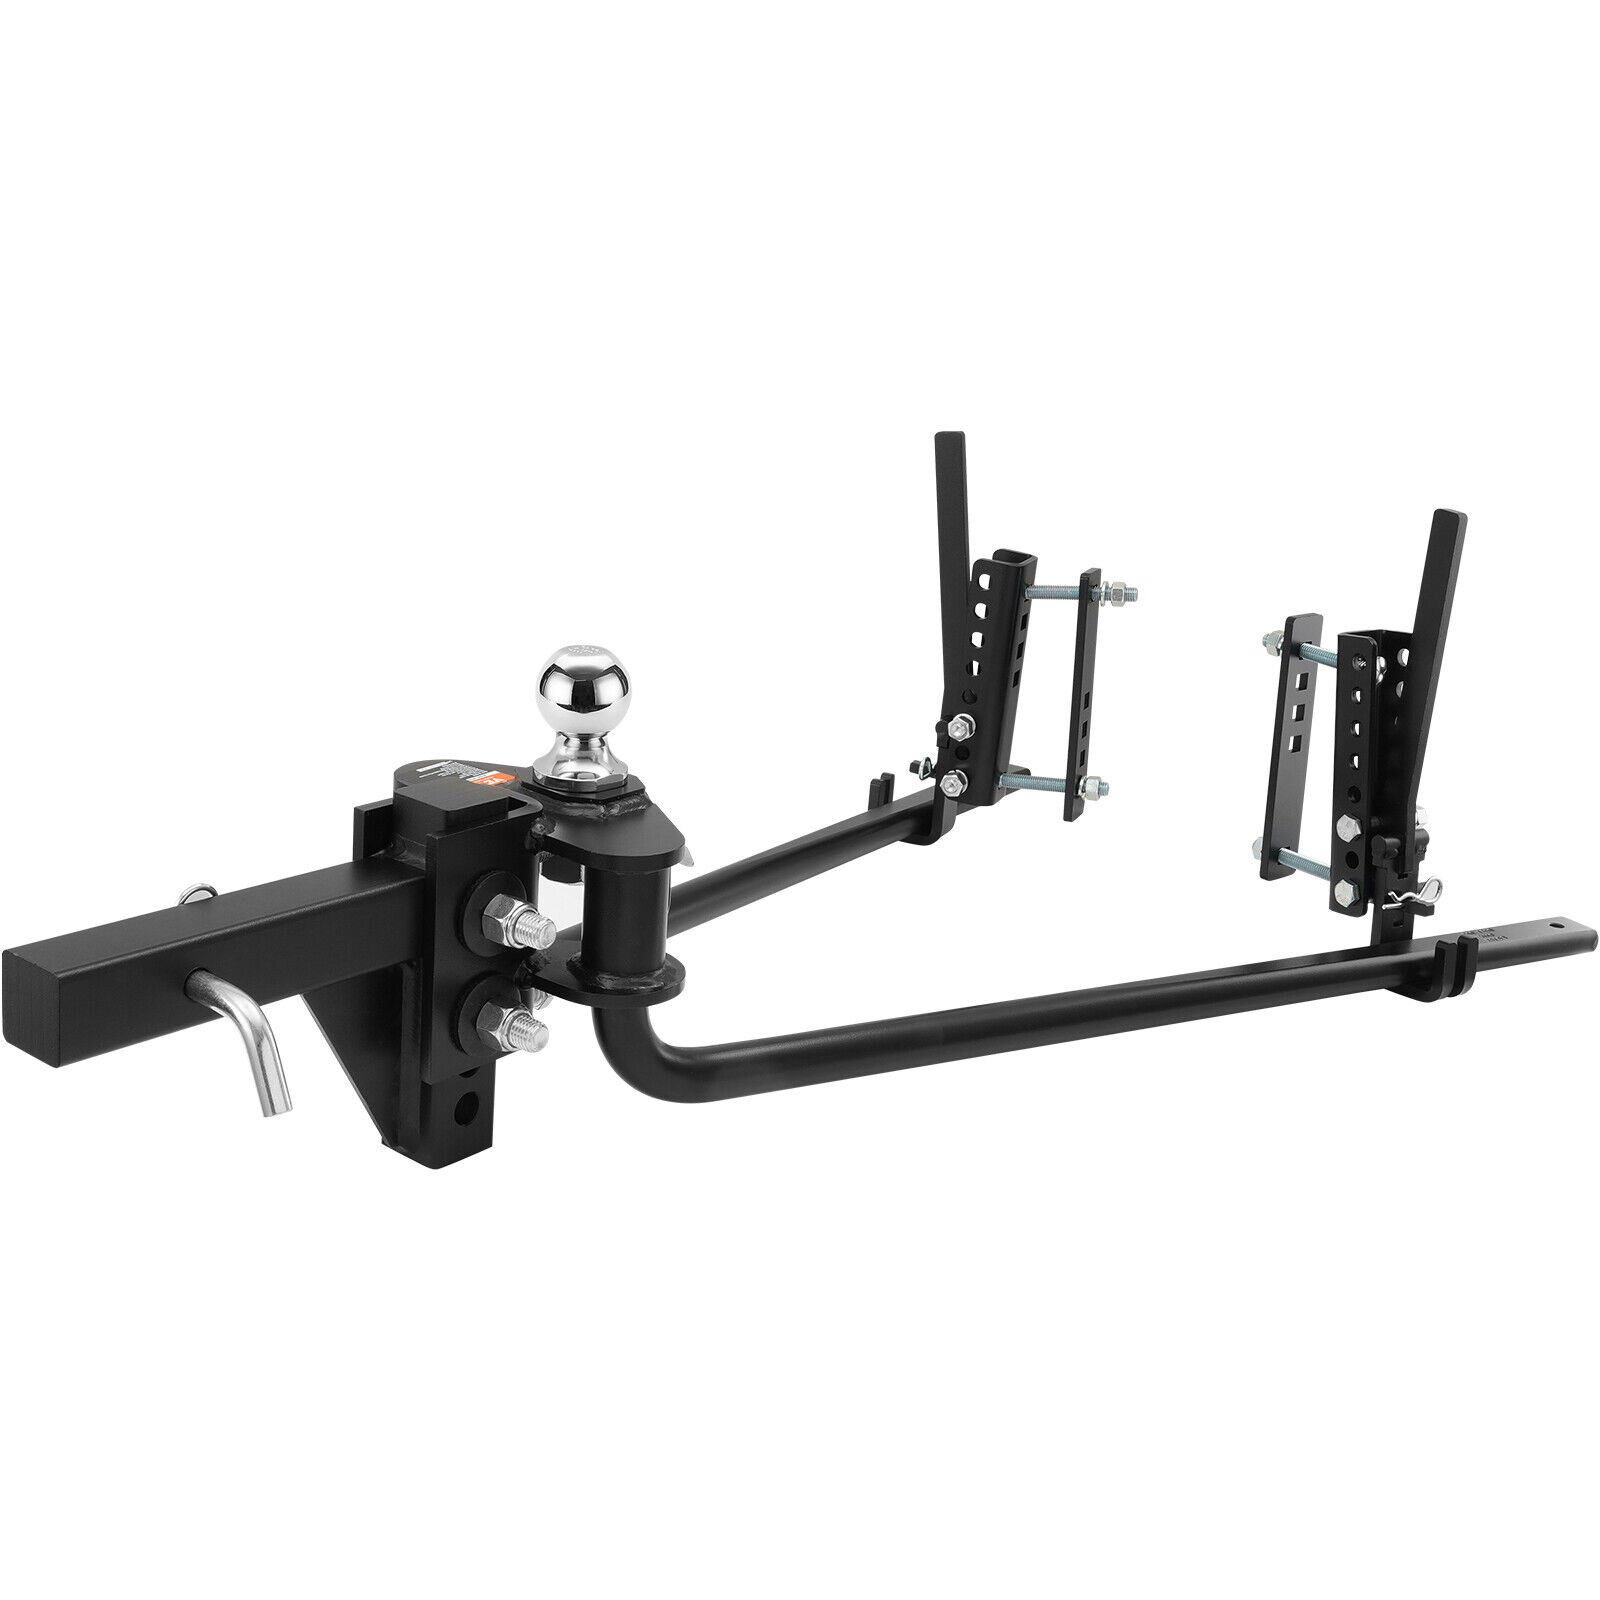 VEVOR 1,500lb Weight Distribution Hitch with 2-5/16 in Ball and 2-In Shank NEW